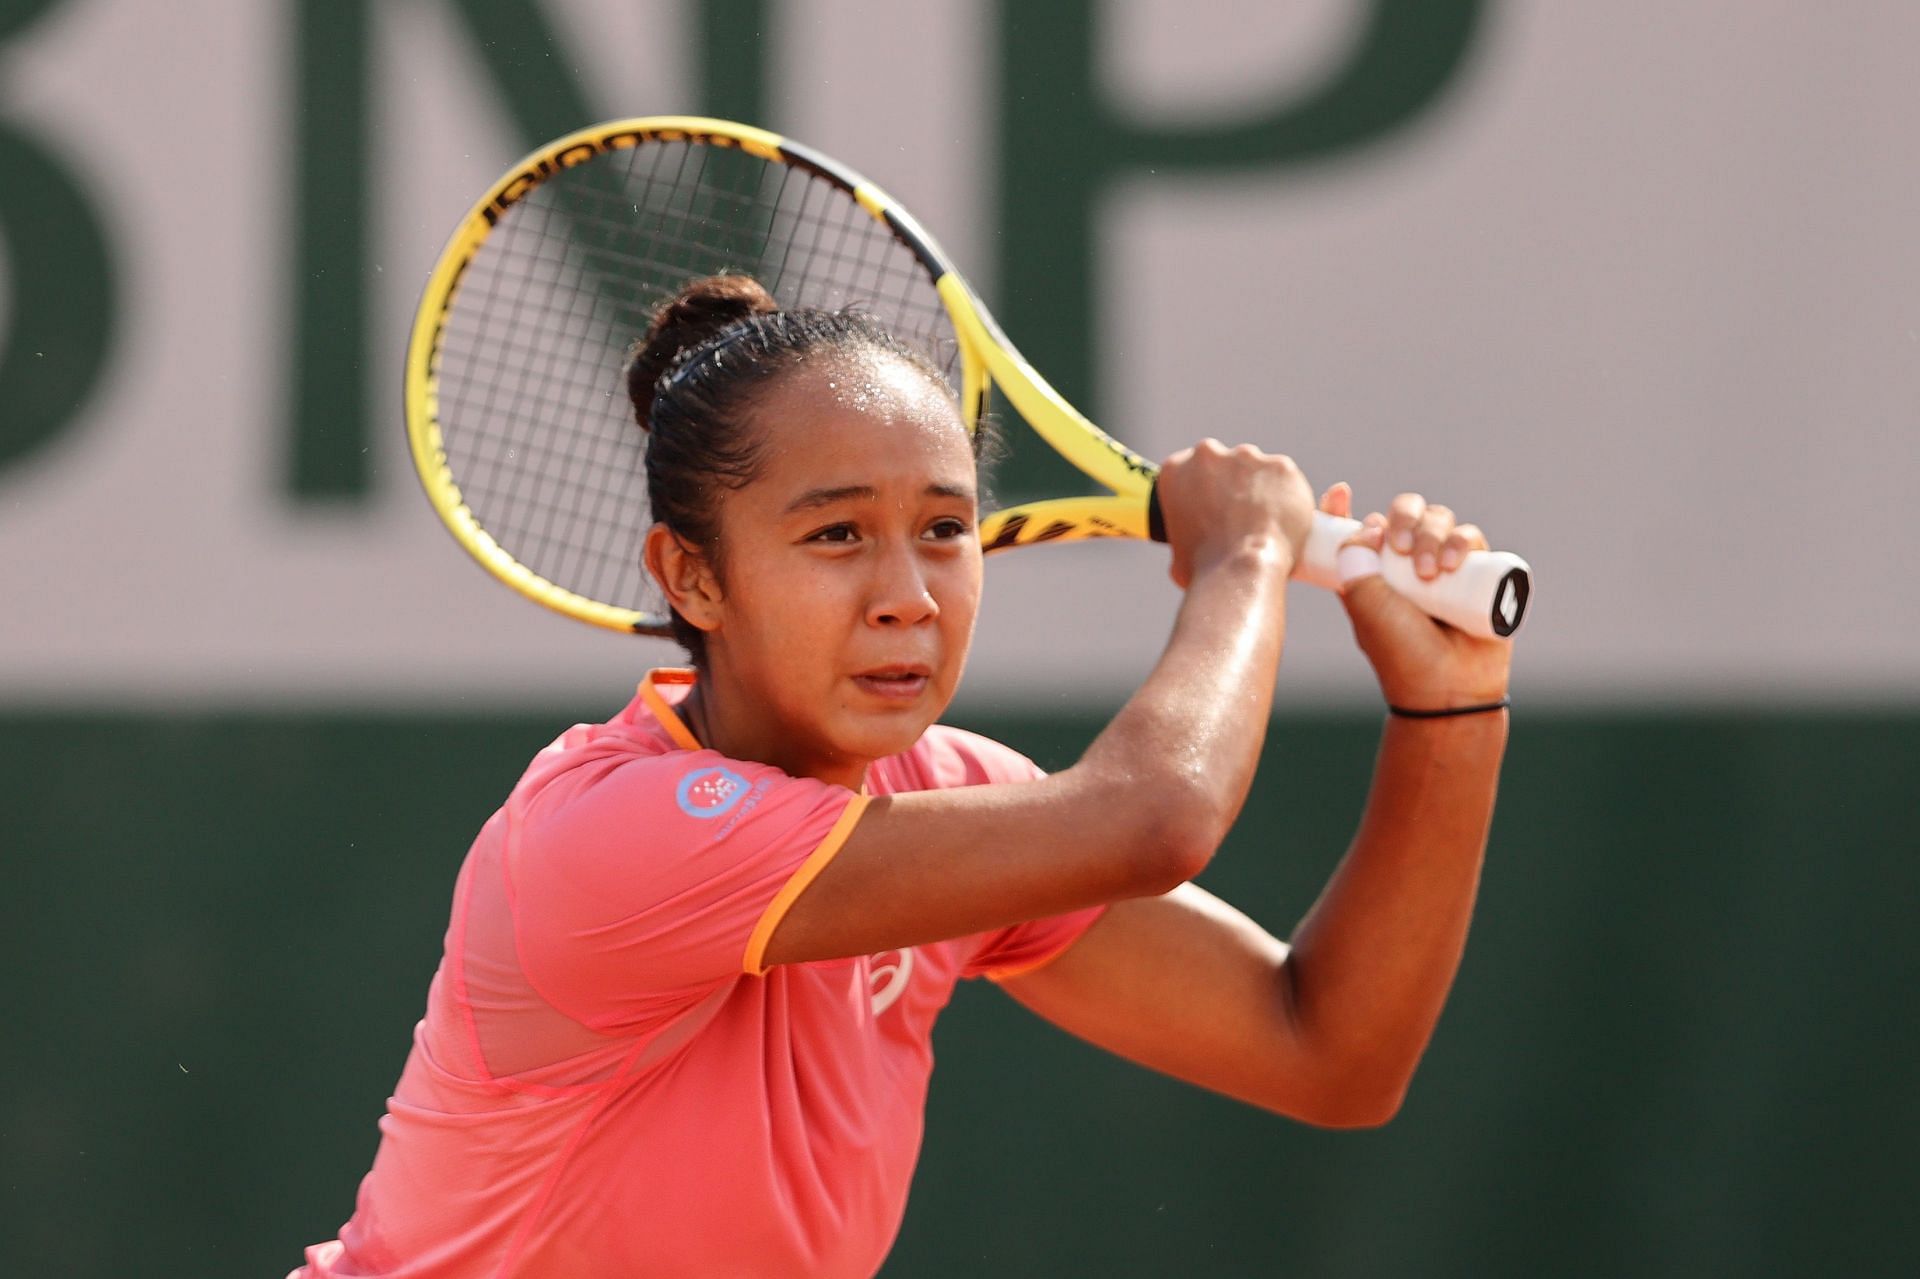 Leylah Fernandez at the 2021 French Open.